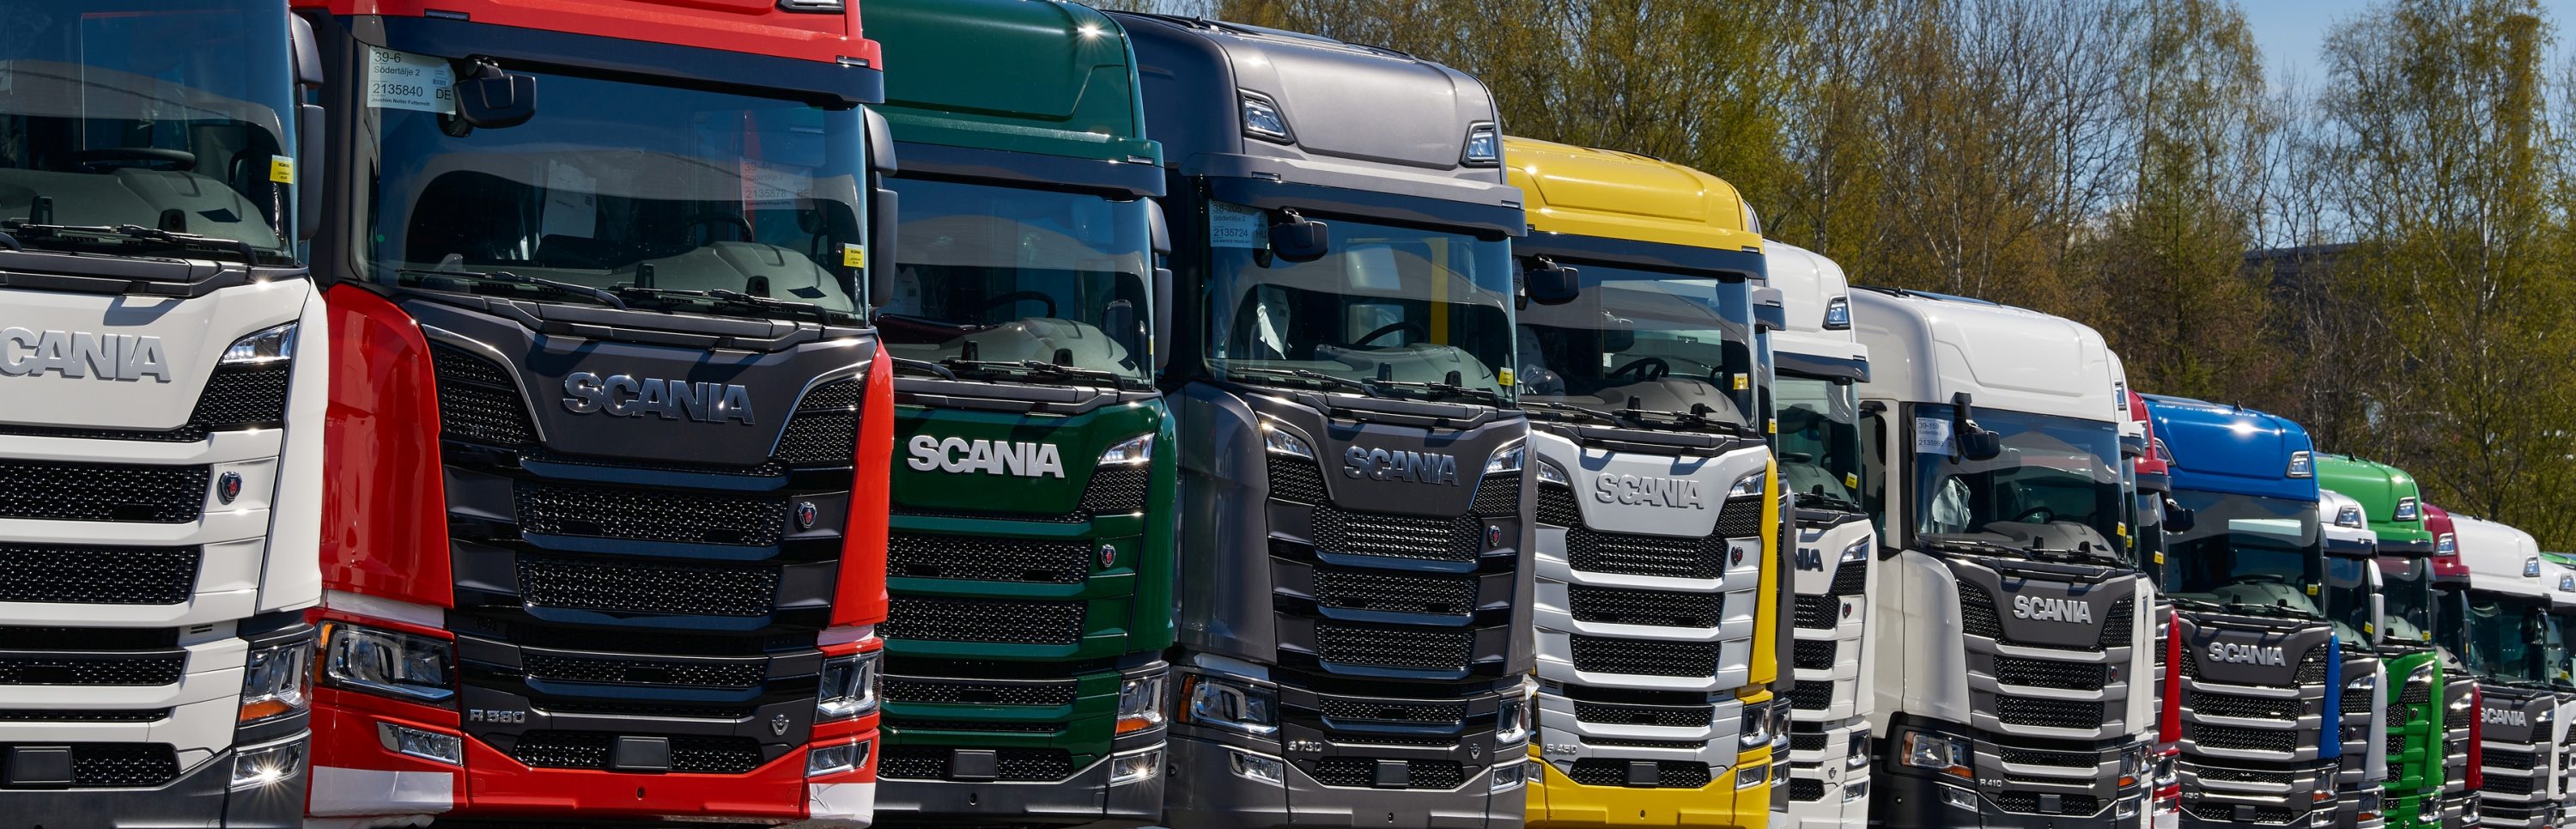 Scania trucks ready for delivery.